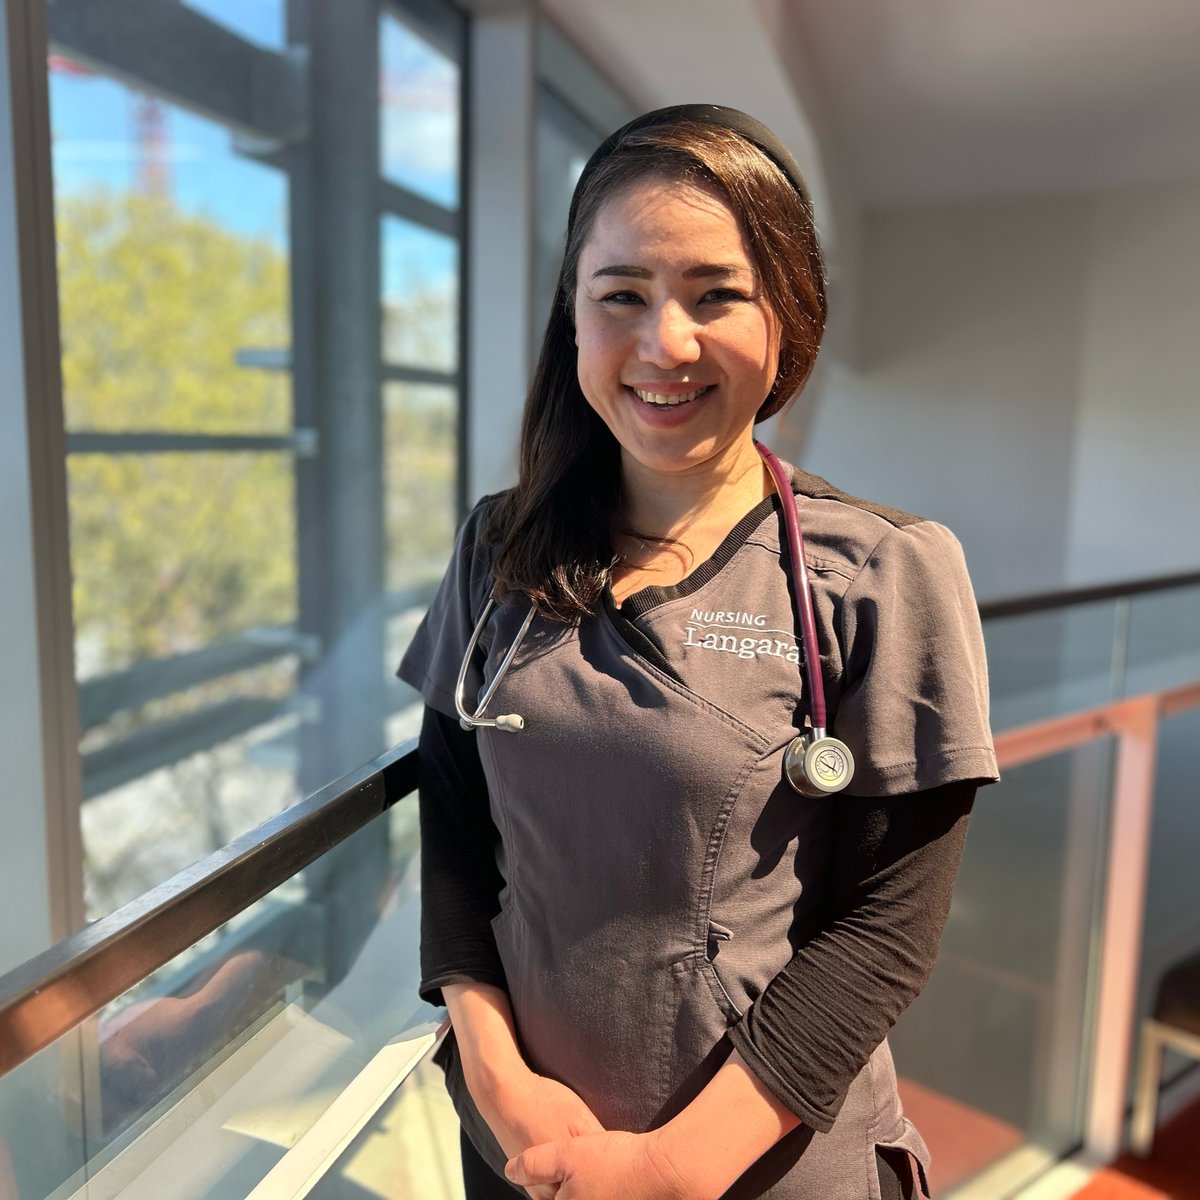 Tomoko Nakamura was a nurse in Japan, but with the help of scholarships and bursaries she finished the Diploma in Nursing Practice in Canada at Langara. BC needs more nurses like Tomoko. And you can help. Take a look here bit.ly/44AePzq. #NationalNursingWeek